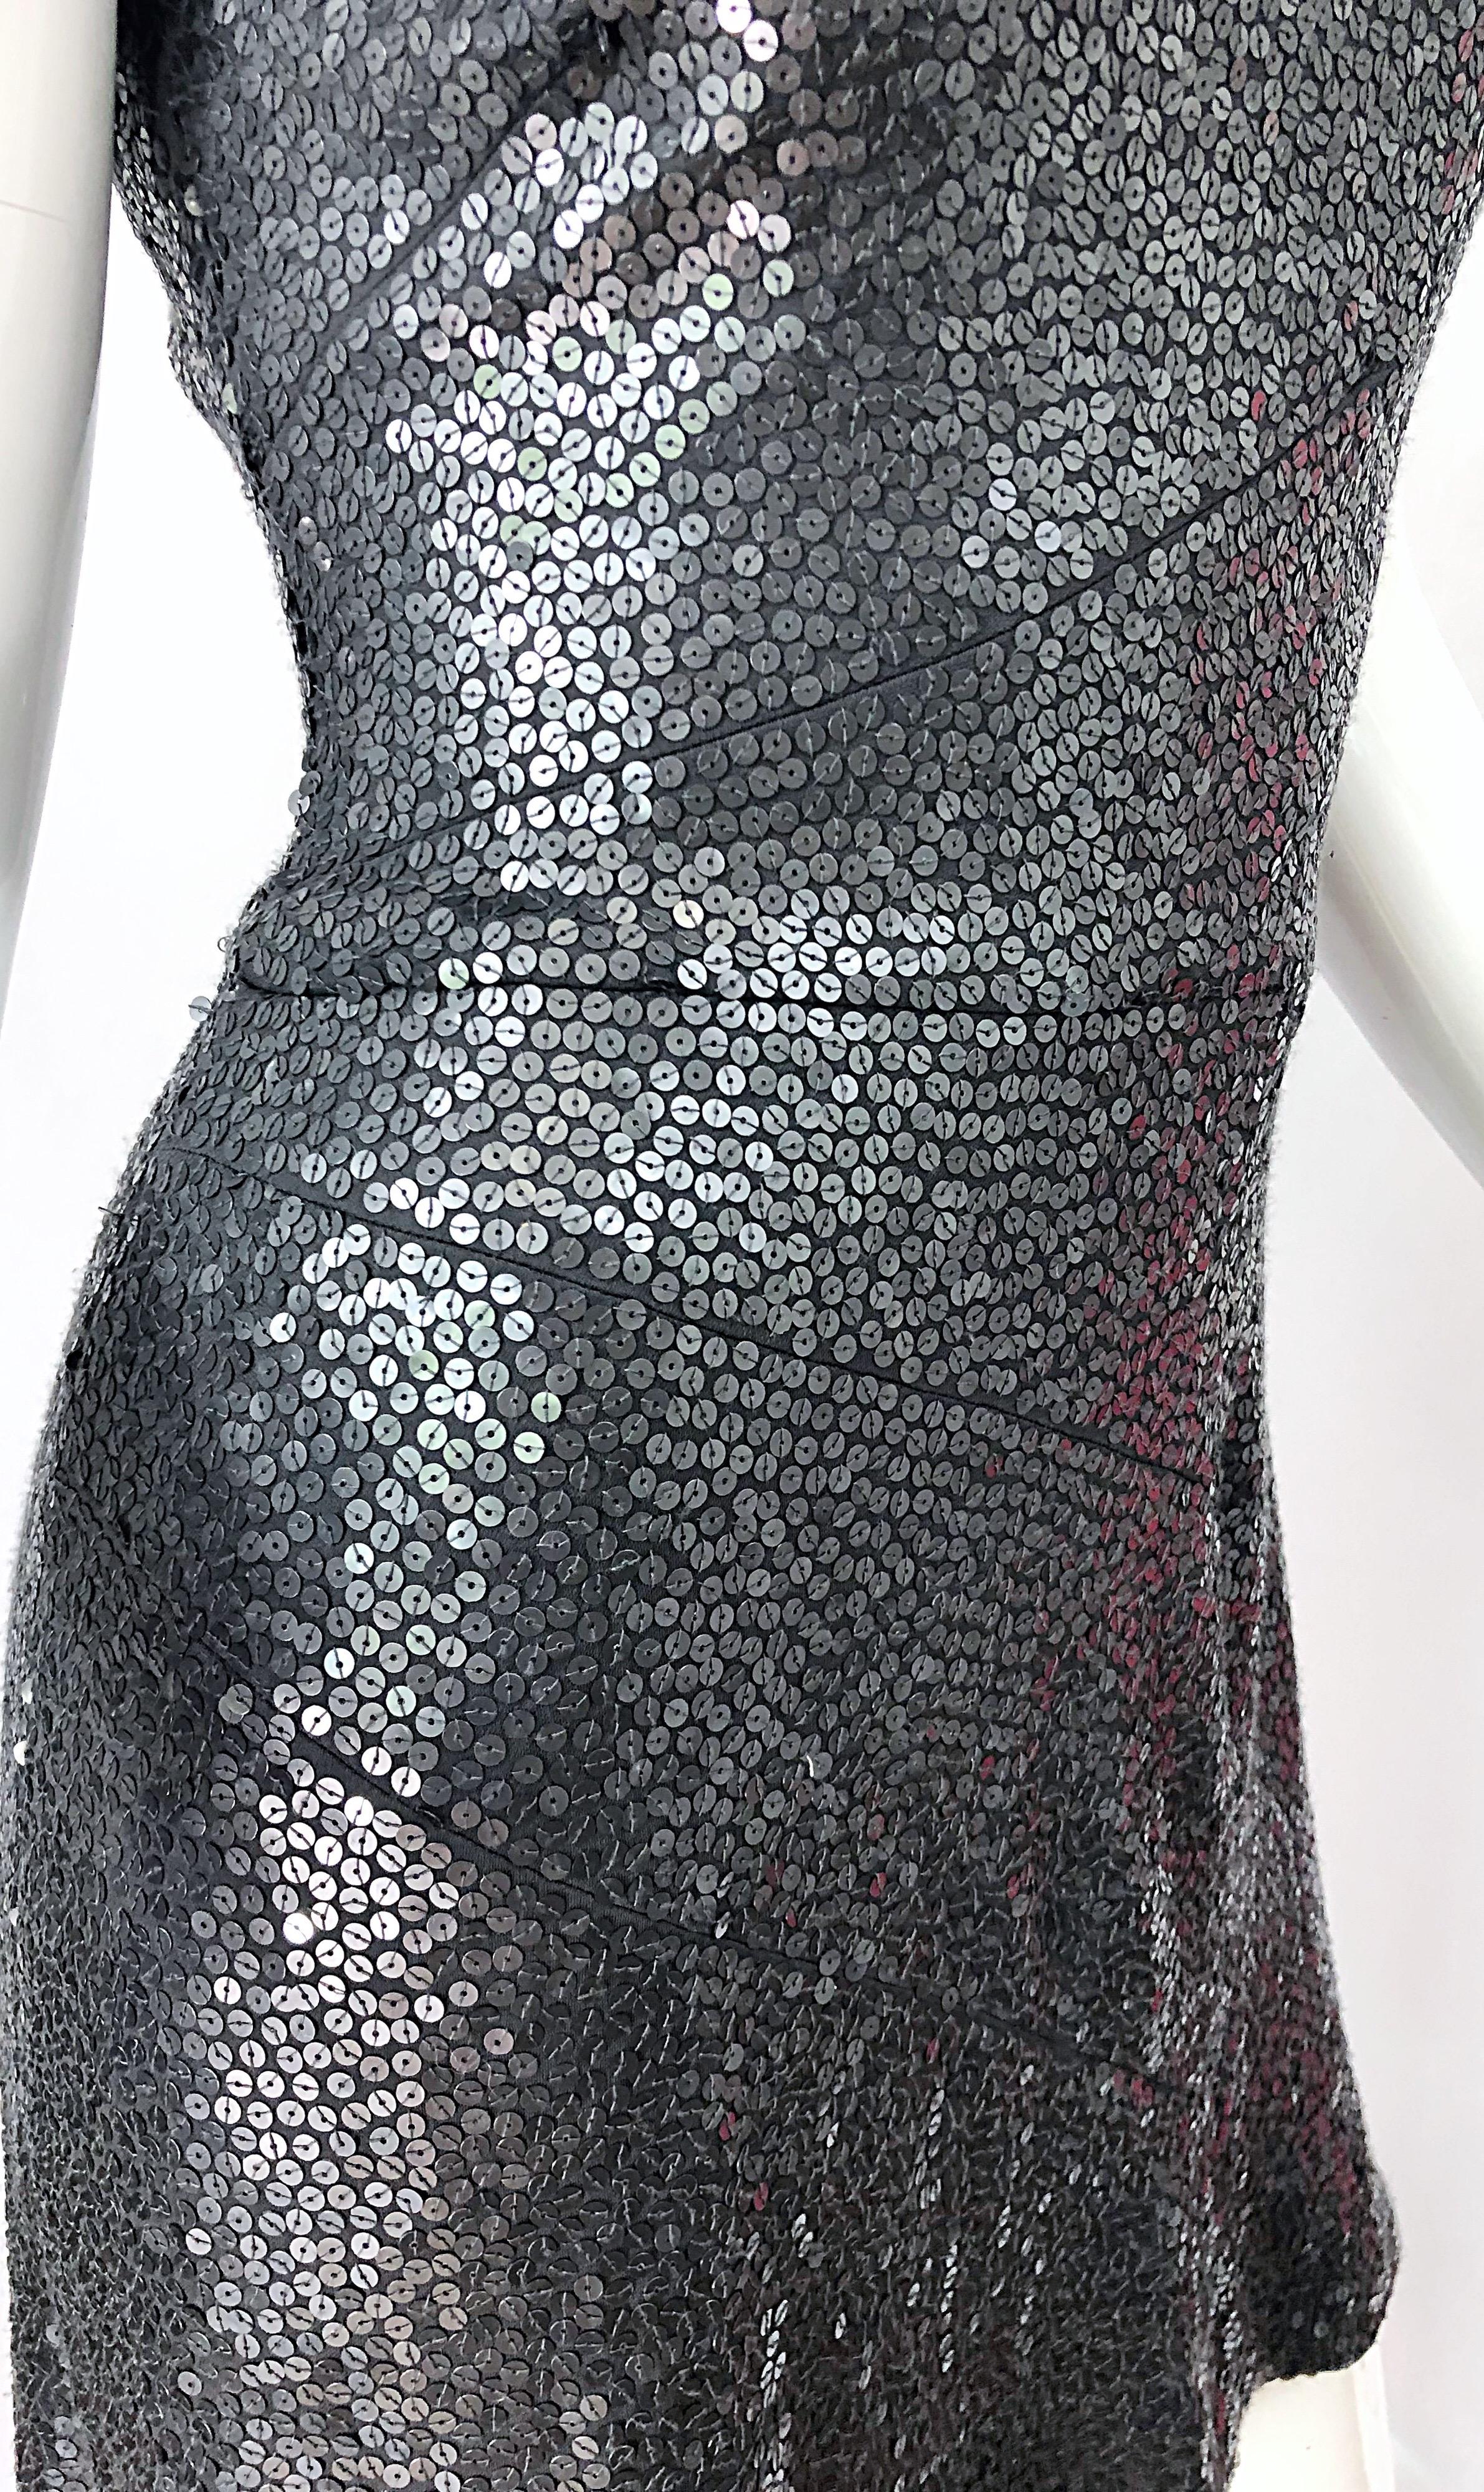 Michael Kors Collection $2, 798 Size 6 Gunmetal Grey Sequined One Shoulder Dress In Excellent Condition For Sale In San Diego, CA